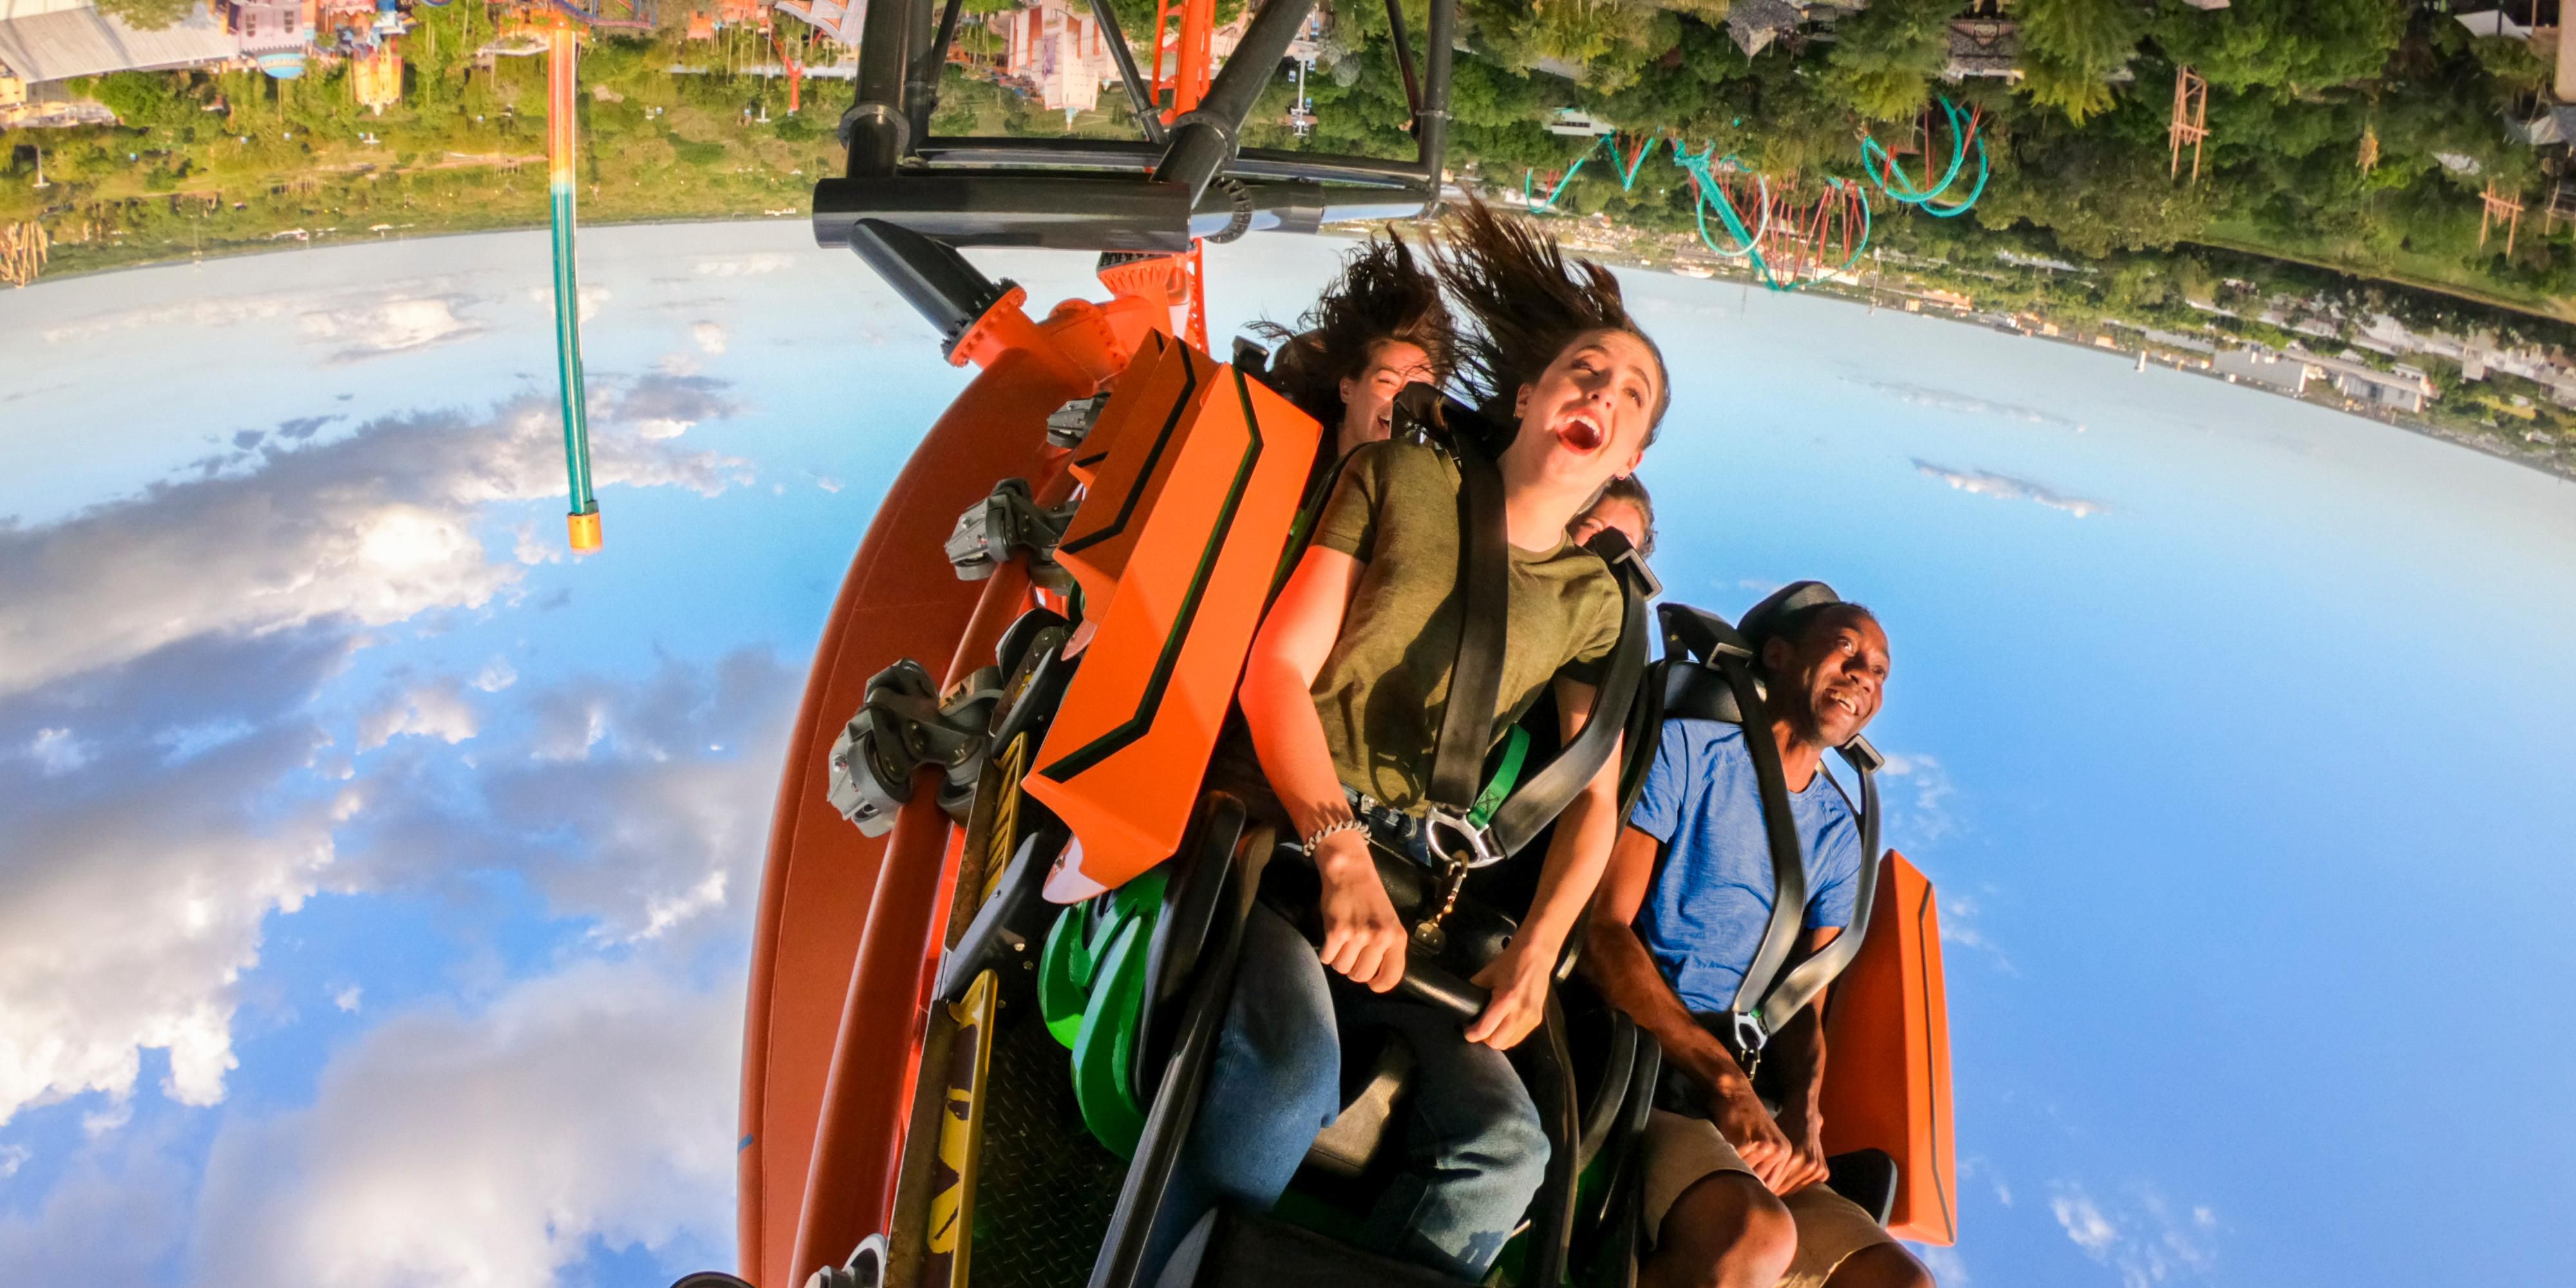 The all new Tigris triple-launch steel roller coaster is Florida’s tallest launch coaster and the ninth coaster in the park’s collection! Contact the hotel directly for information on discounted tickets.